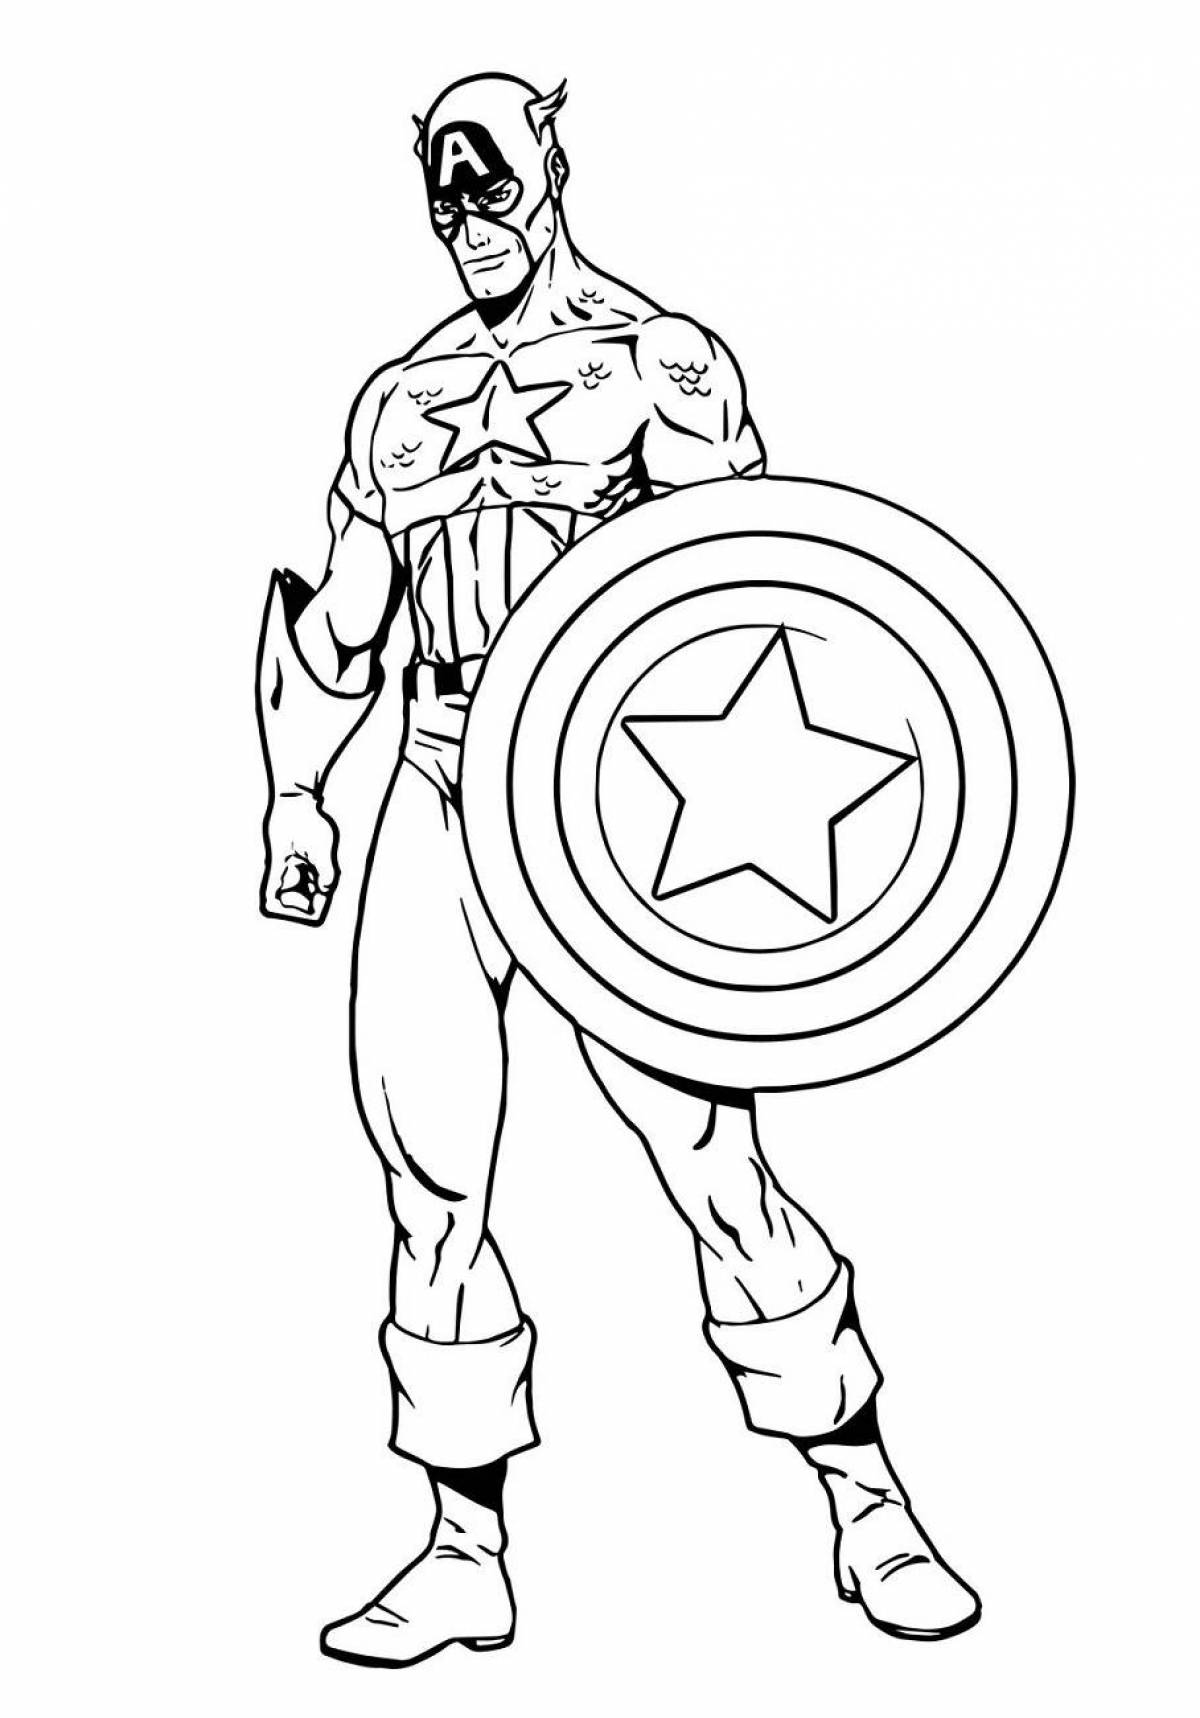 Coloring page shiny captain america